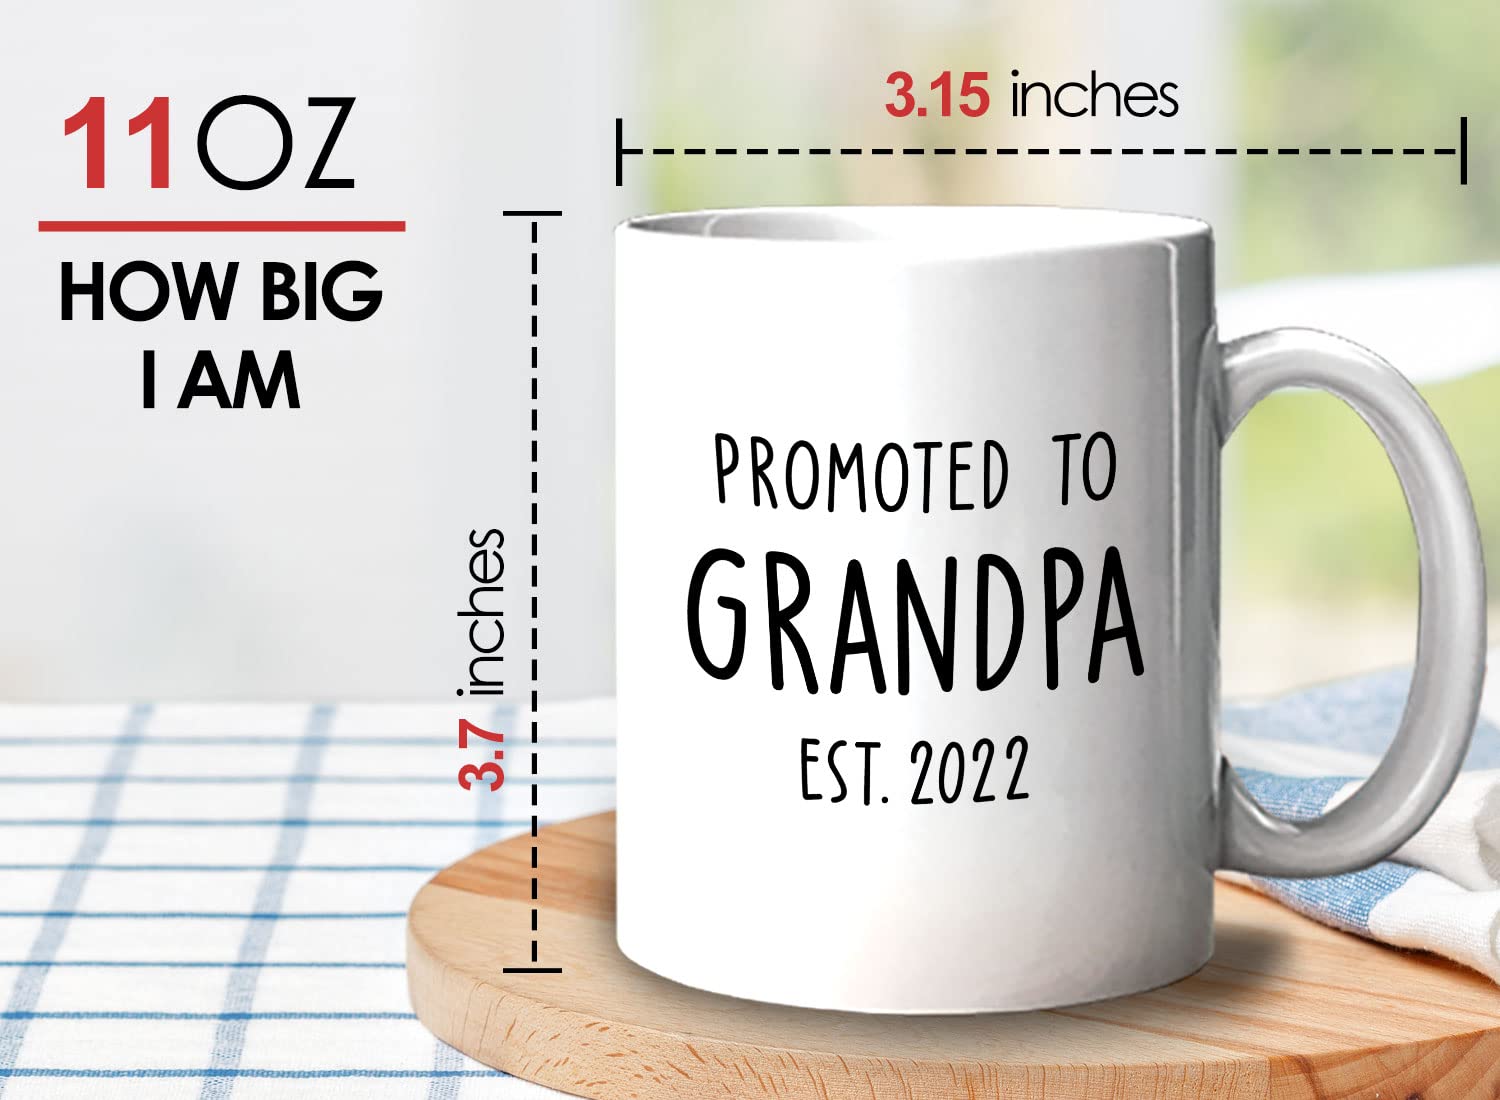 Bubble Hugs Family Coffee Mug 11oz White - Promoted To Grandpa - Grandparents Expecting A Baby Birth Gender Announcement Pregnancy Baby Shower Grandchild